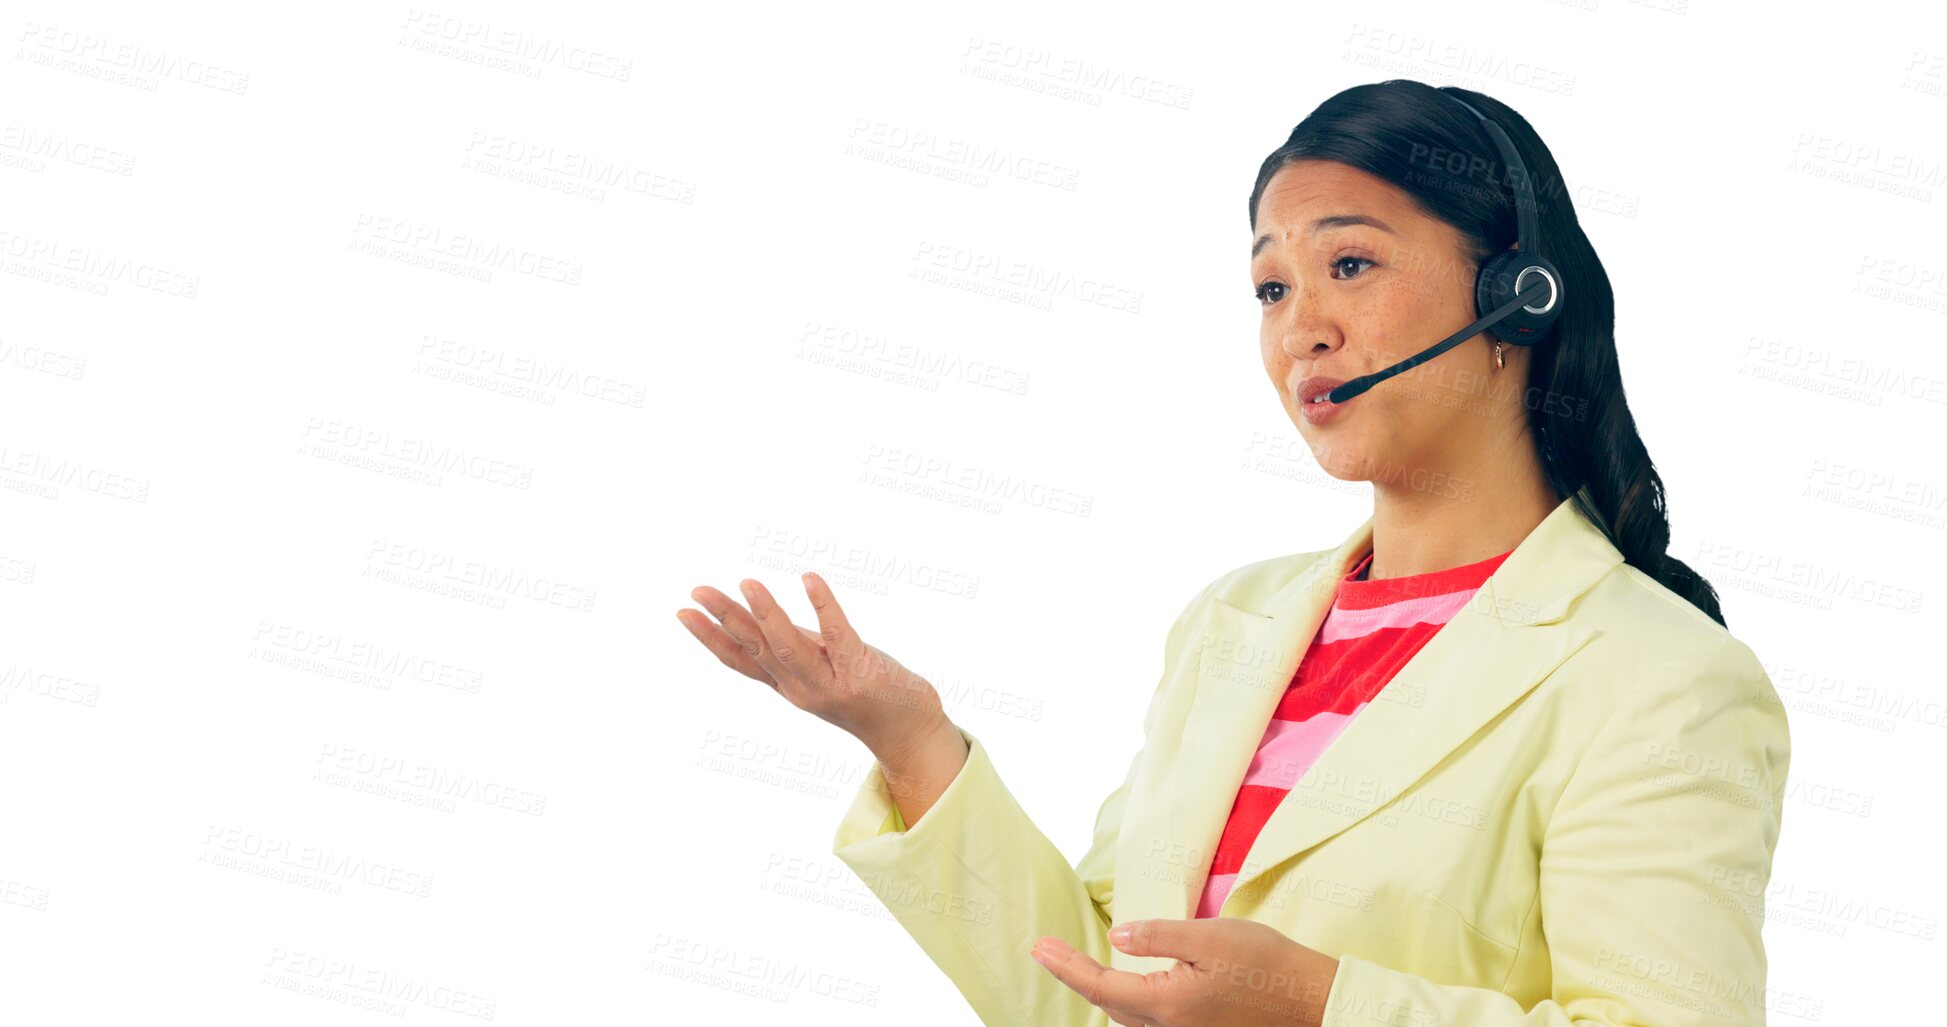 Buy stock photo Customer support, talking and business Asian woman for consulting service, contact and communication. Call center, telemarketing and person with headset on isolated, png and transparent background